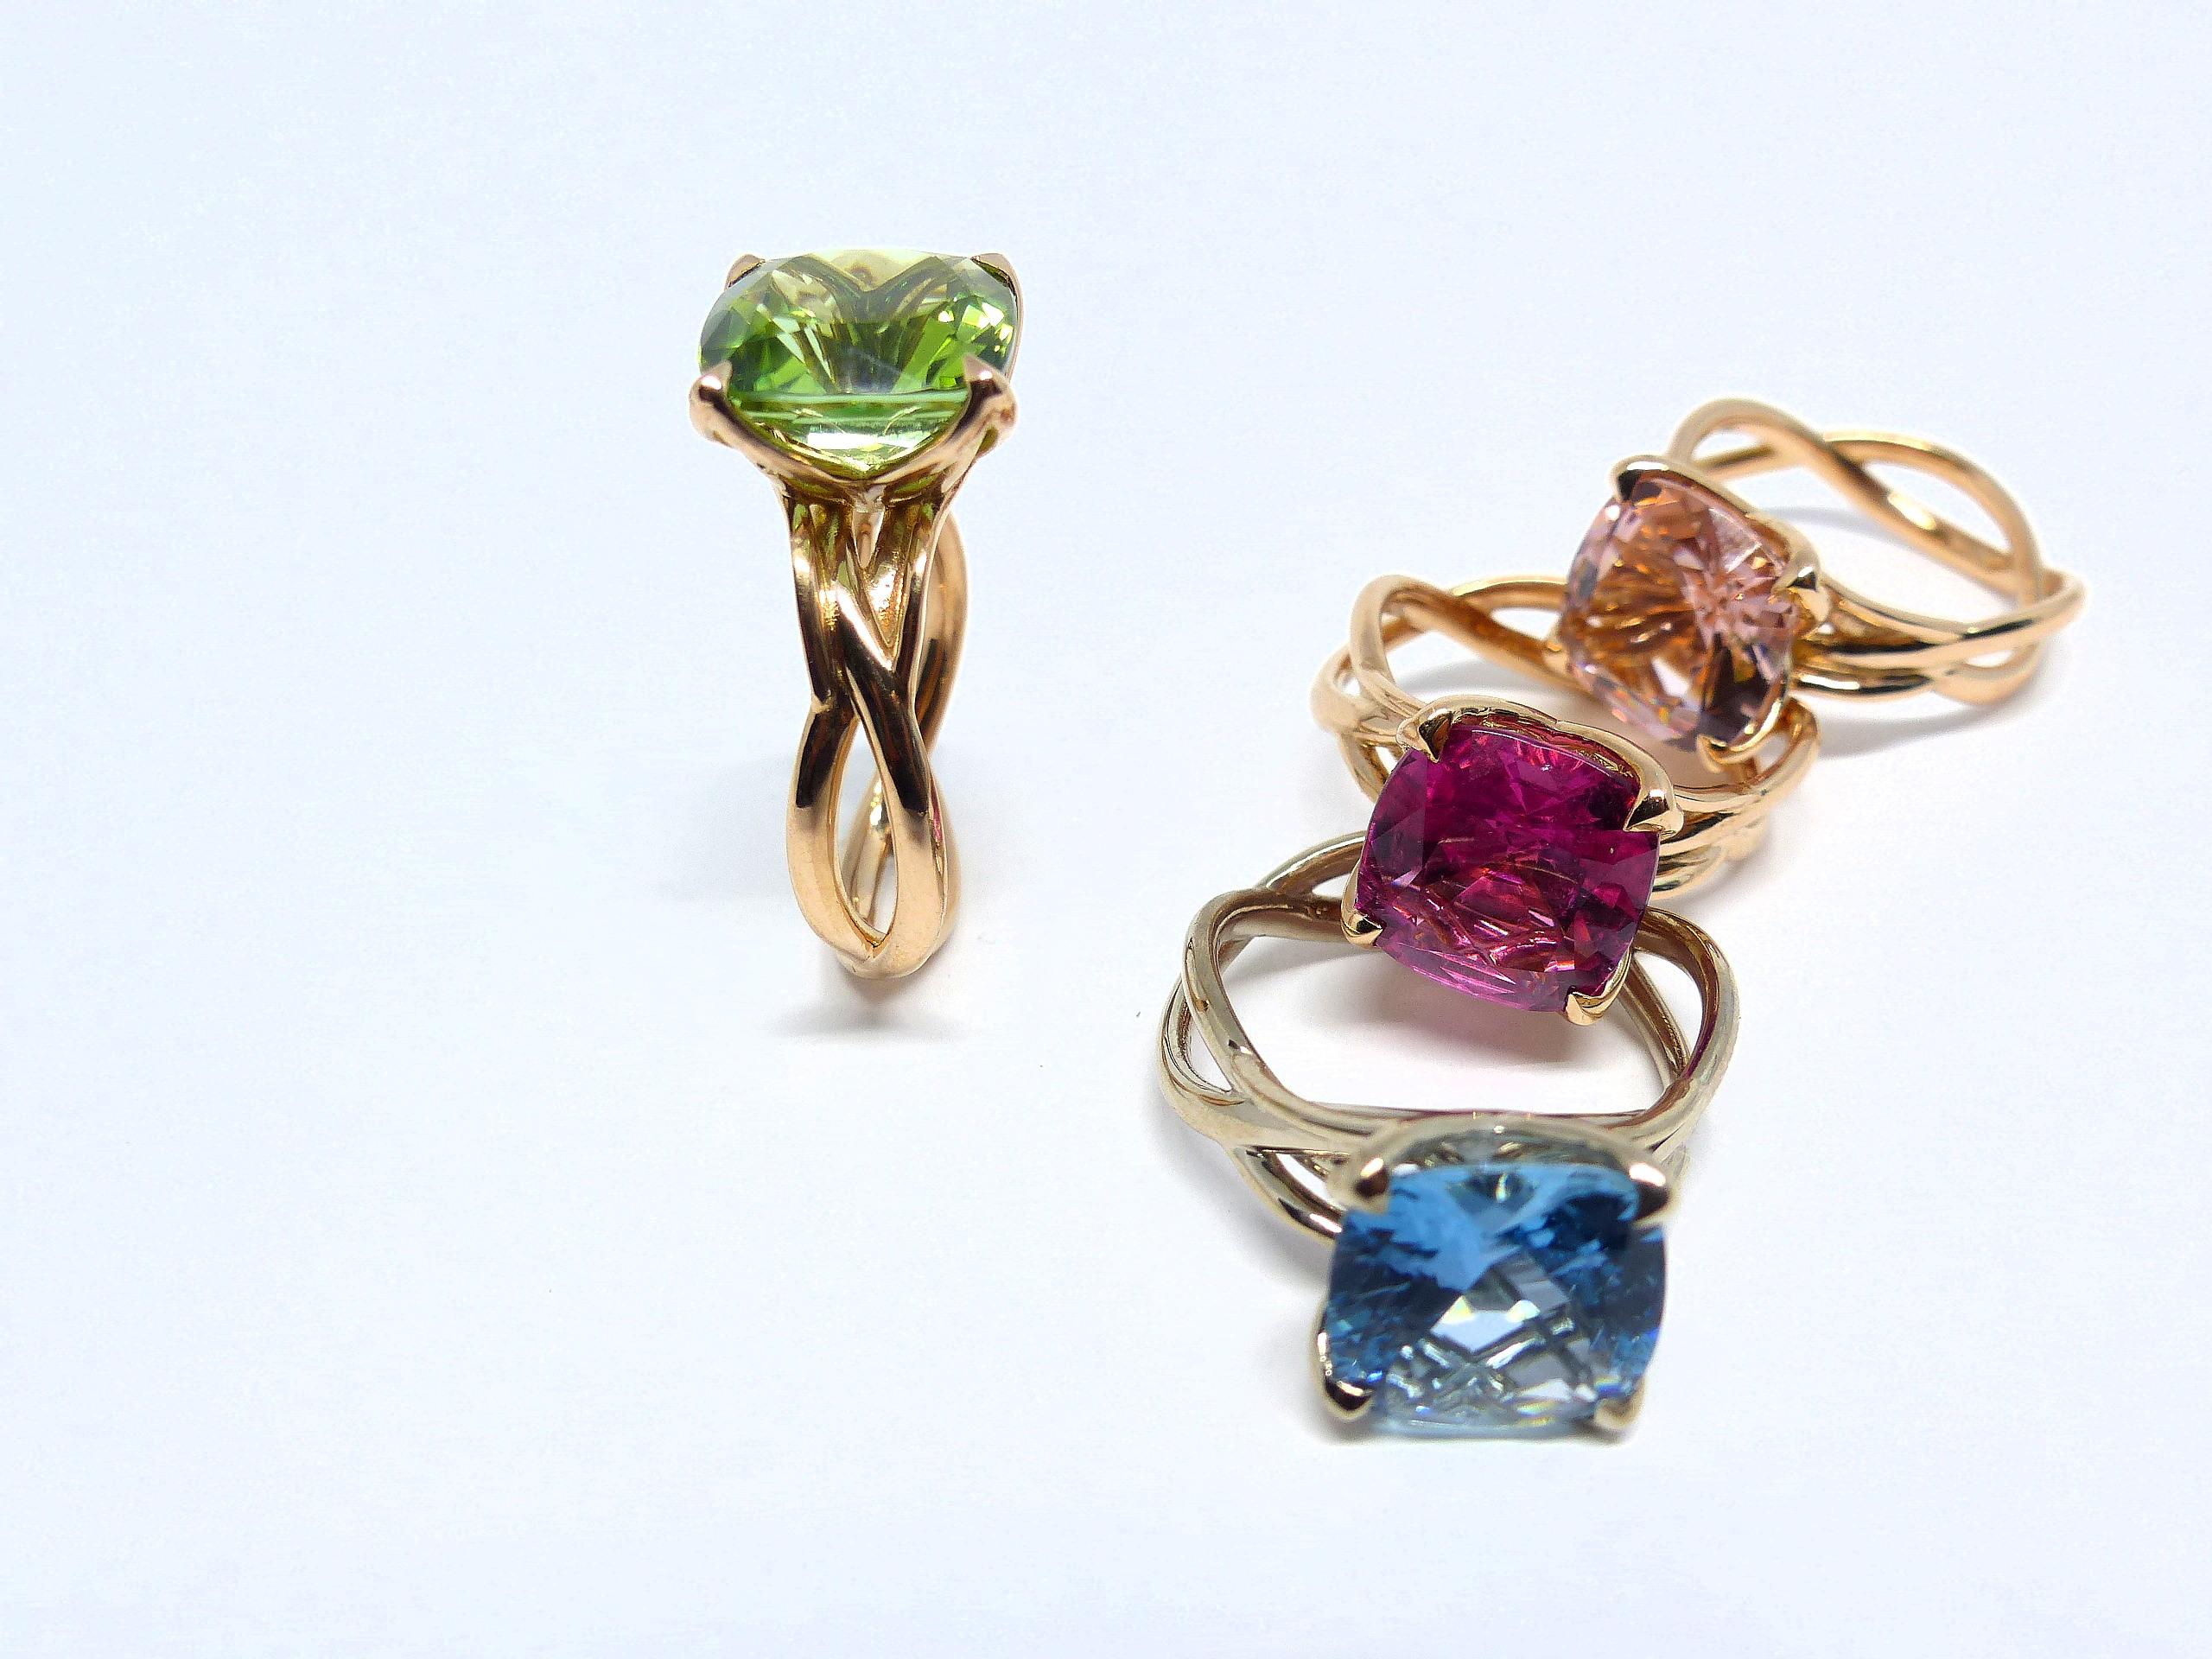 Cushion Cut Ring in Rose Gold with 1 Green Tourmaline Cushion Shape 11x11mm. For Sale